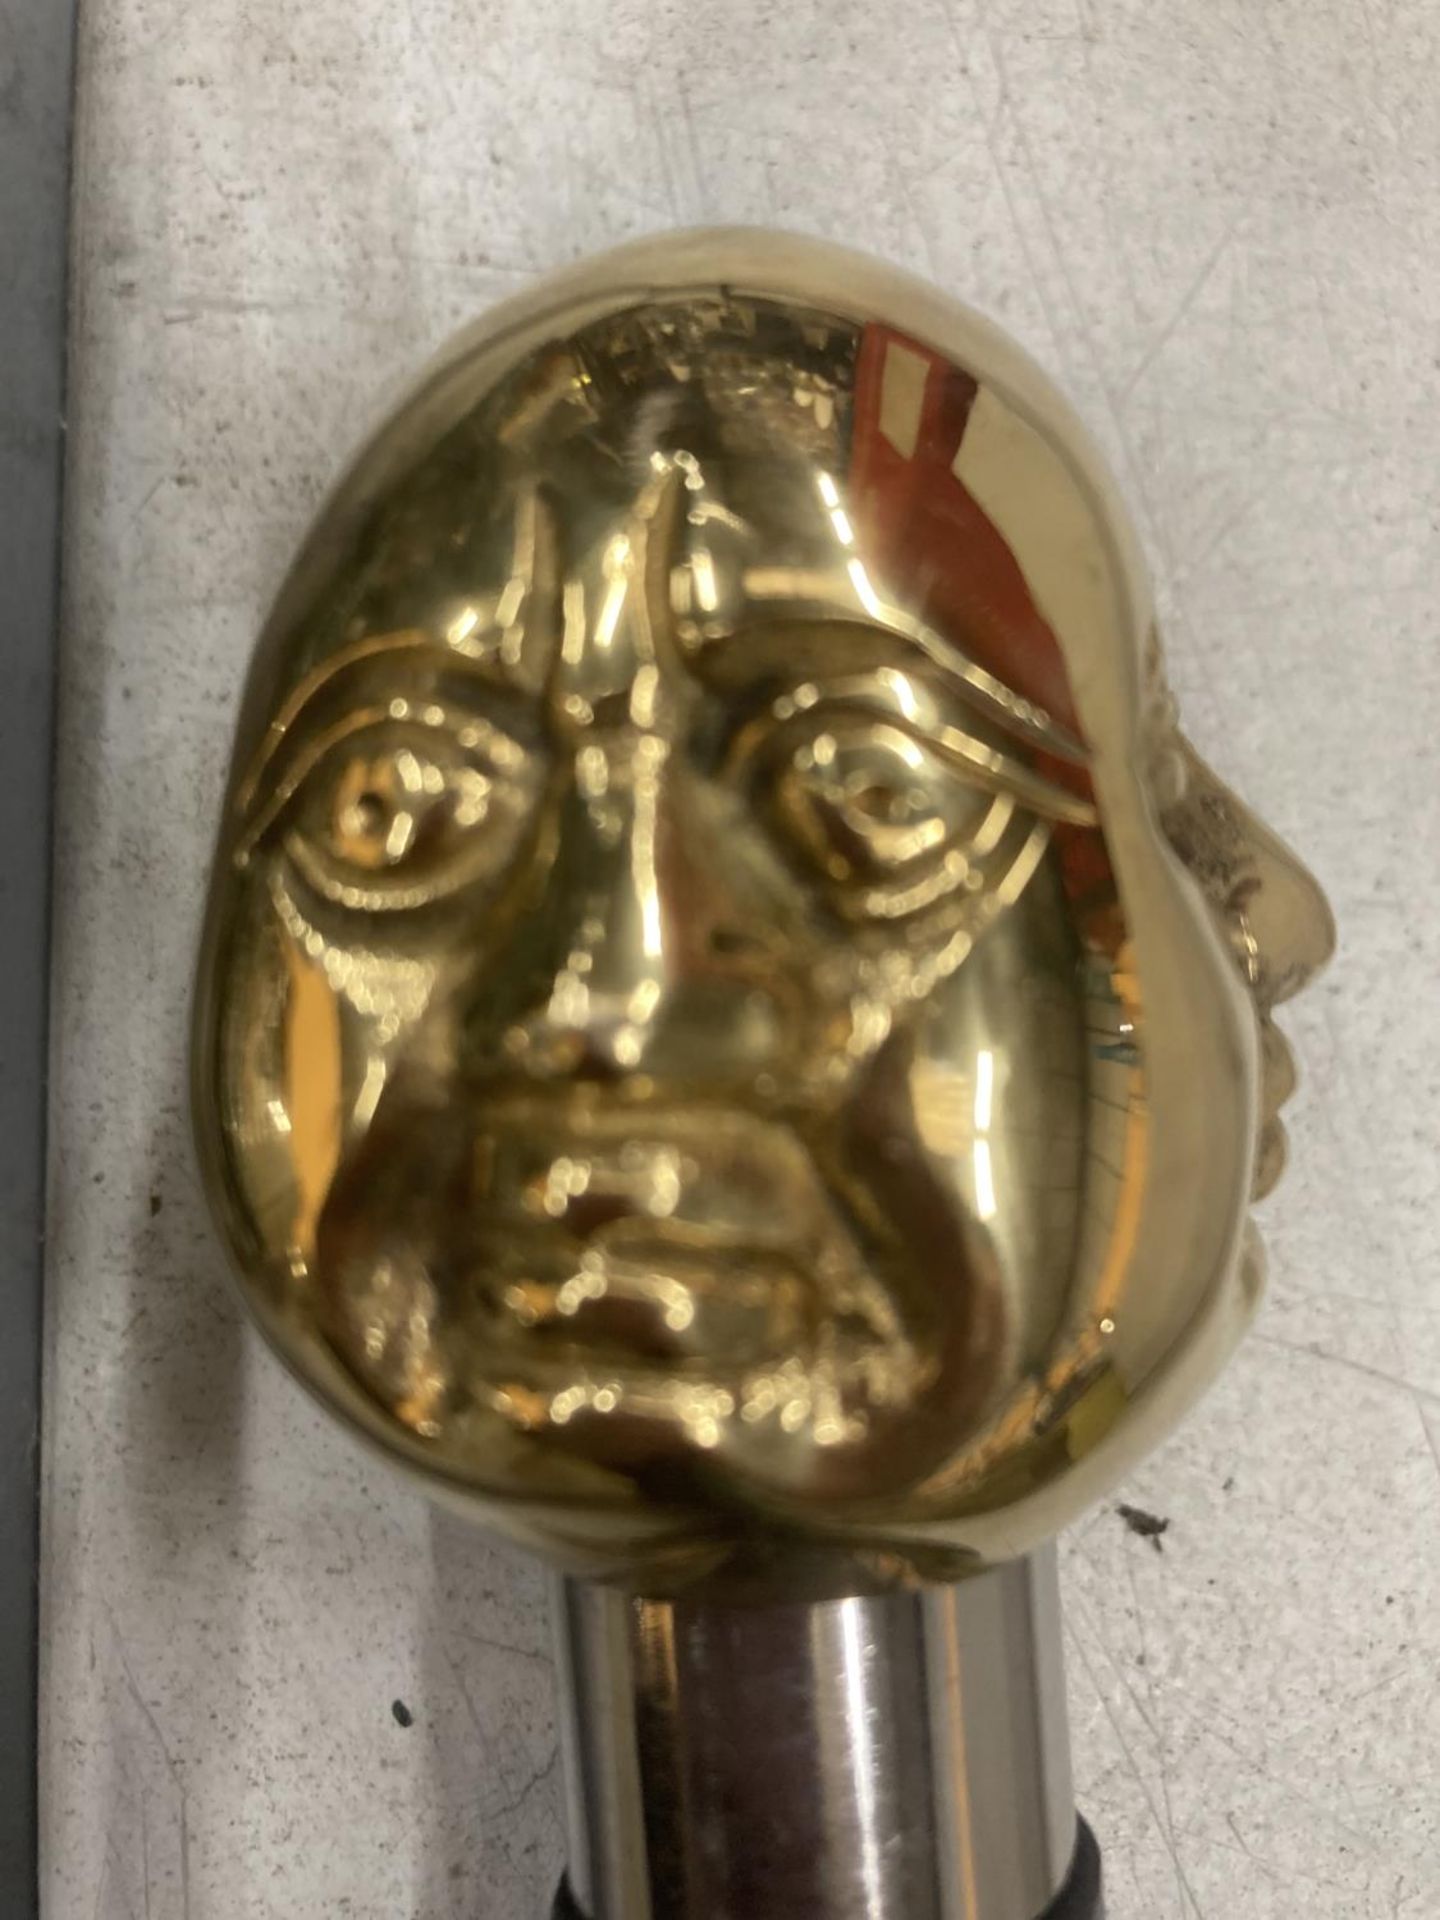 A BRASS FOUR FACED BUDDHA HANDLE WALKING STICK - Image 5 of 5